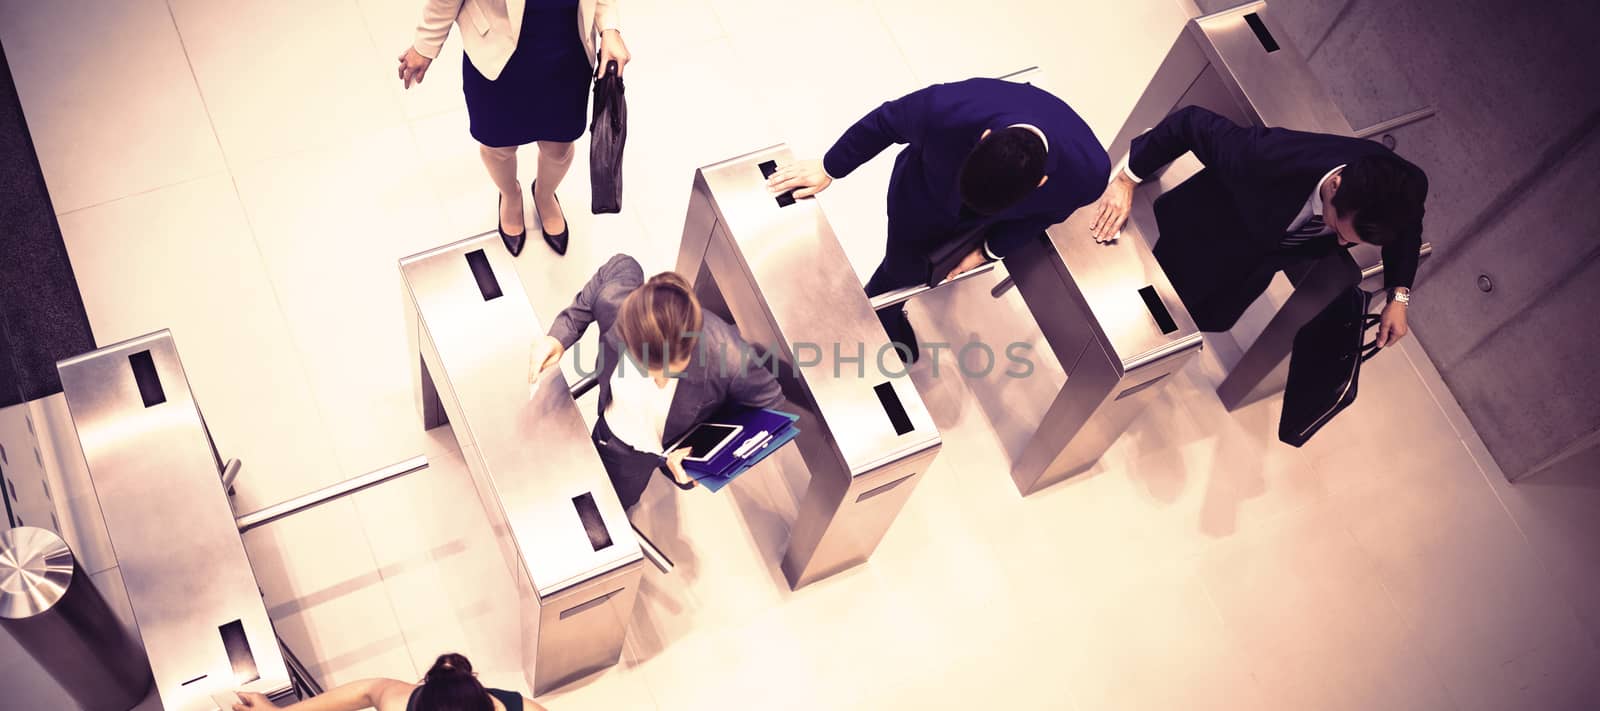 Top view of business executives passing through turnstile gate